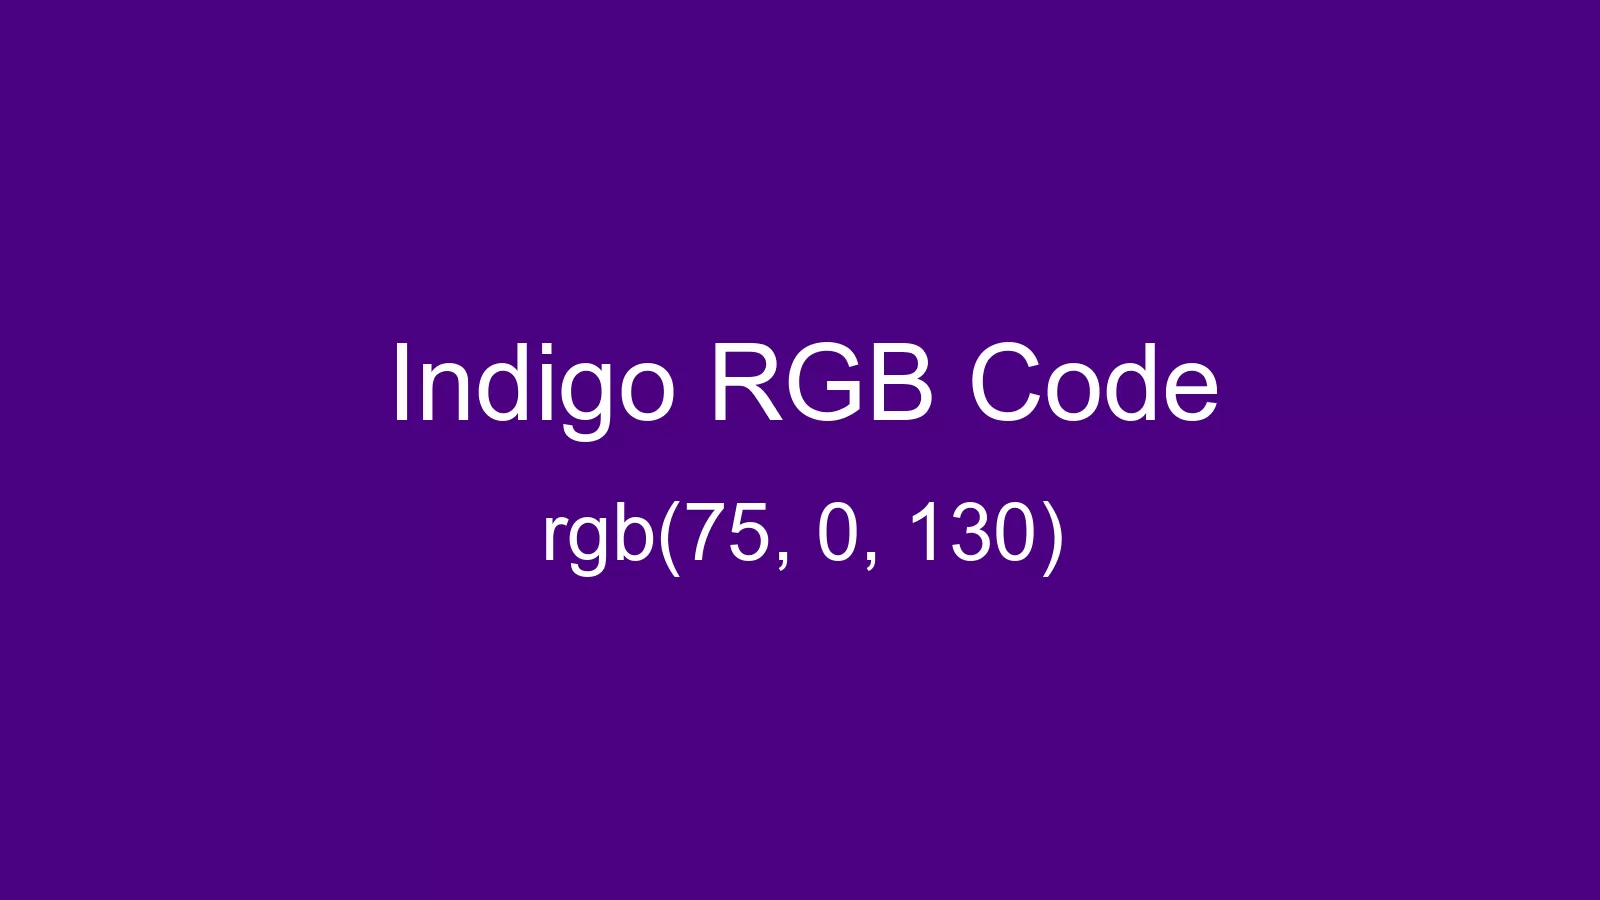 preview image of Indigo color and RGB code